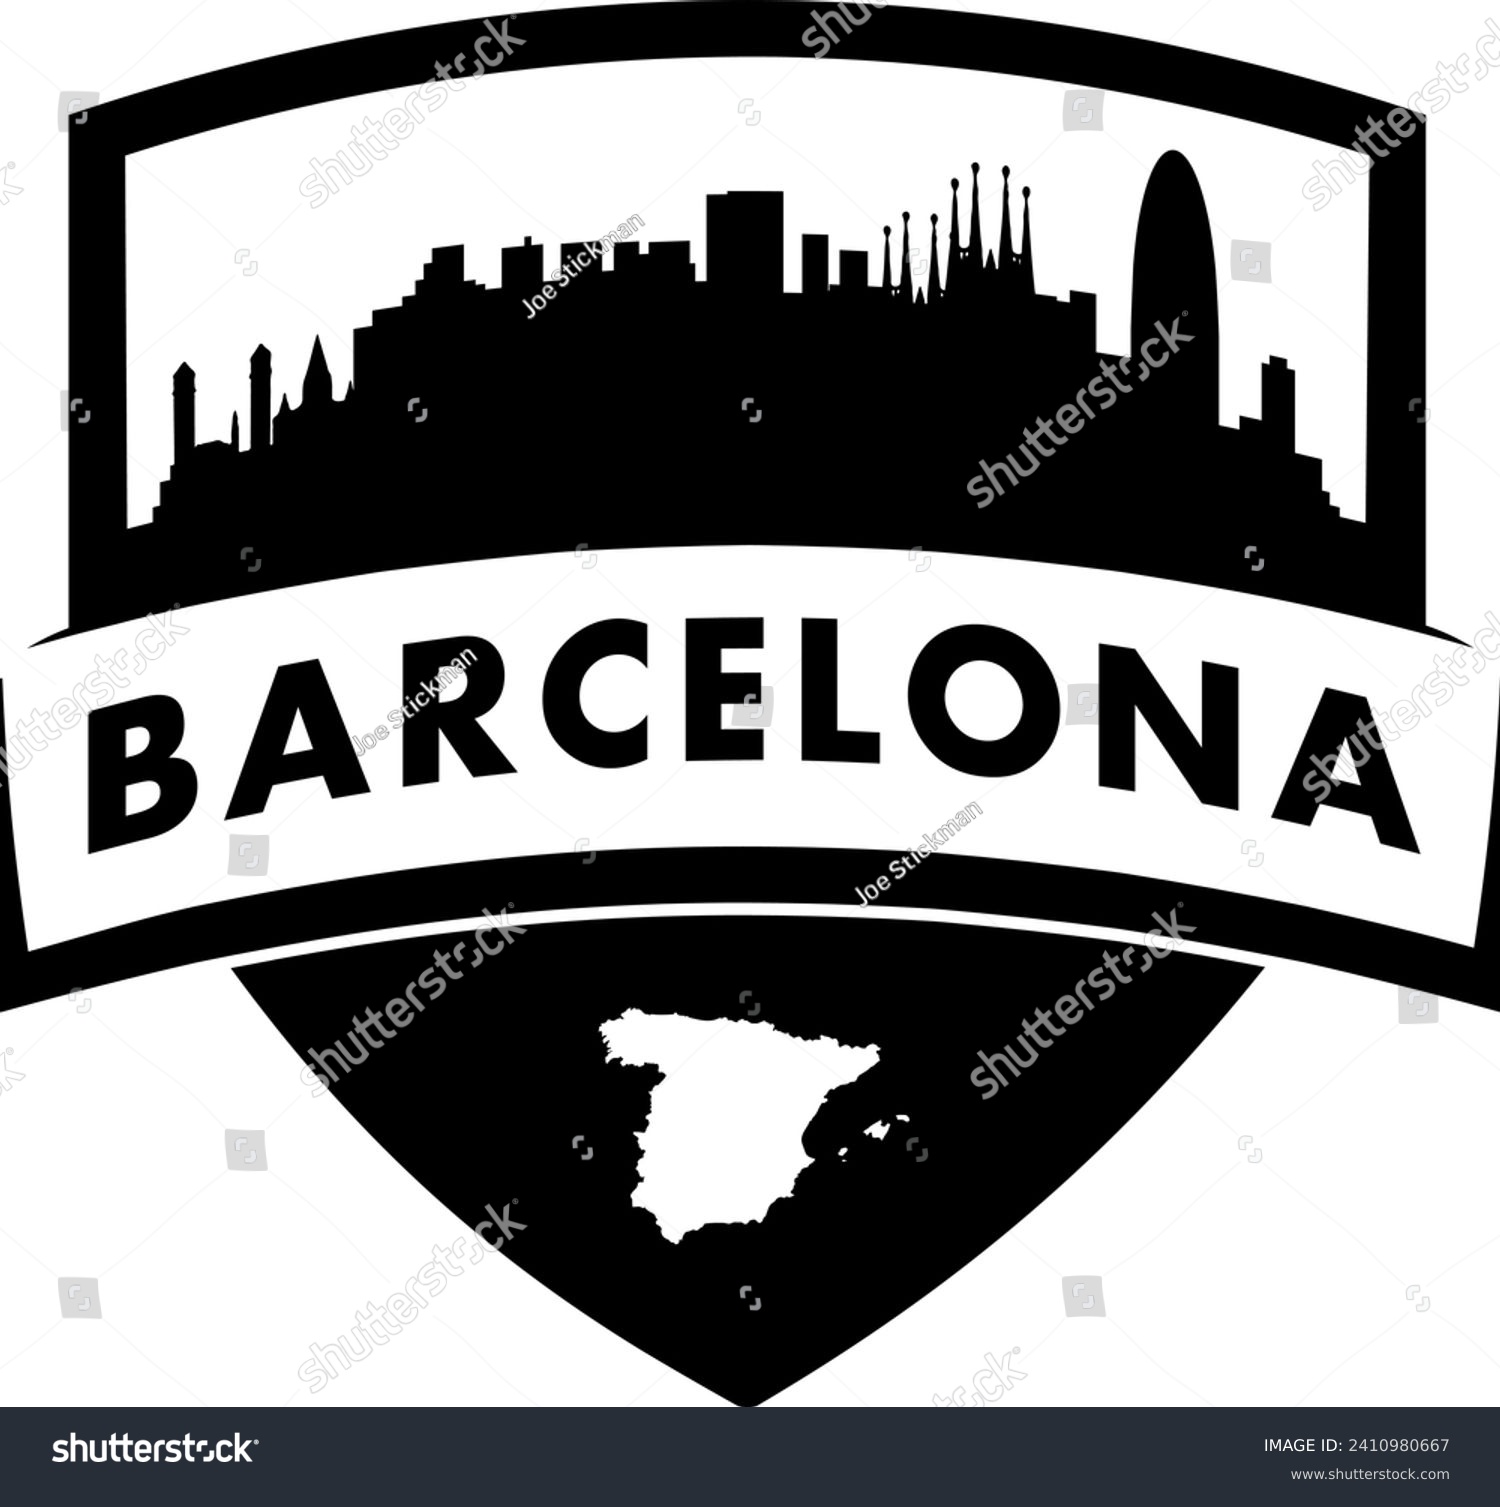 SVG of City of Barcelona Spain black and white shield style city buildings silhouette shield graphic with knockout white outline of the state border shape under name. Vector eps design.  svg